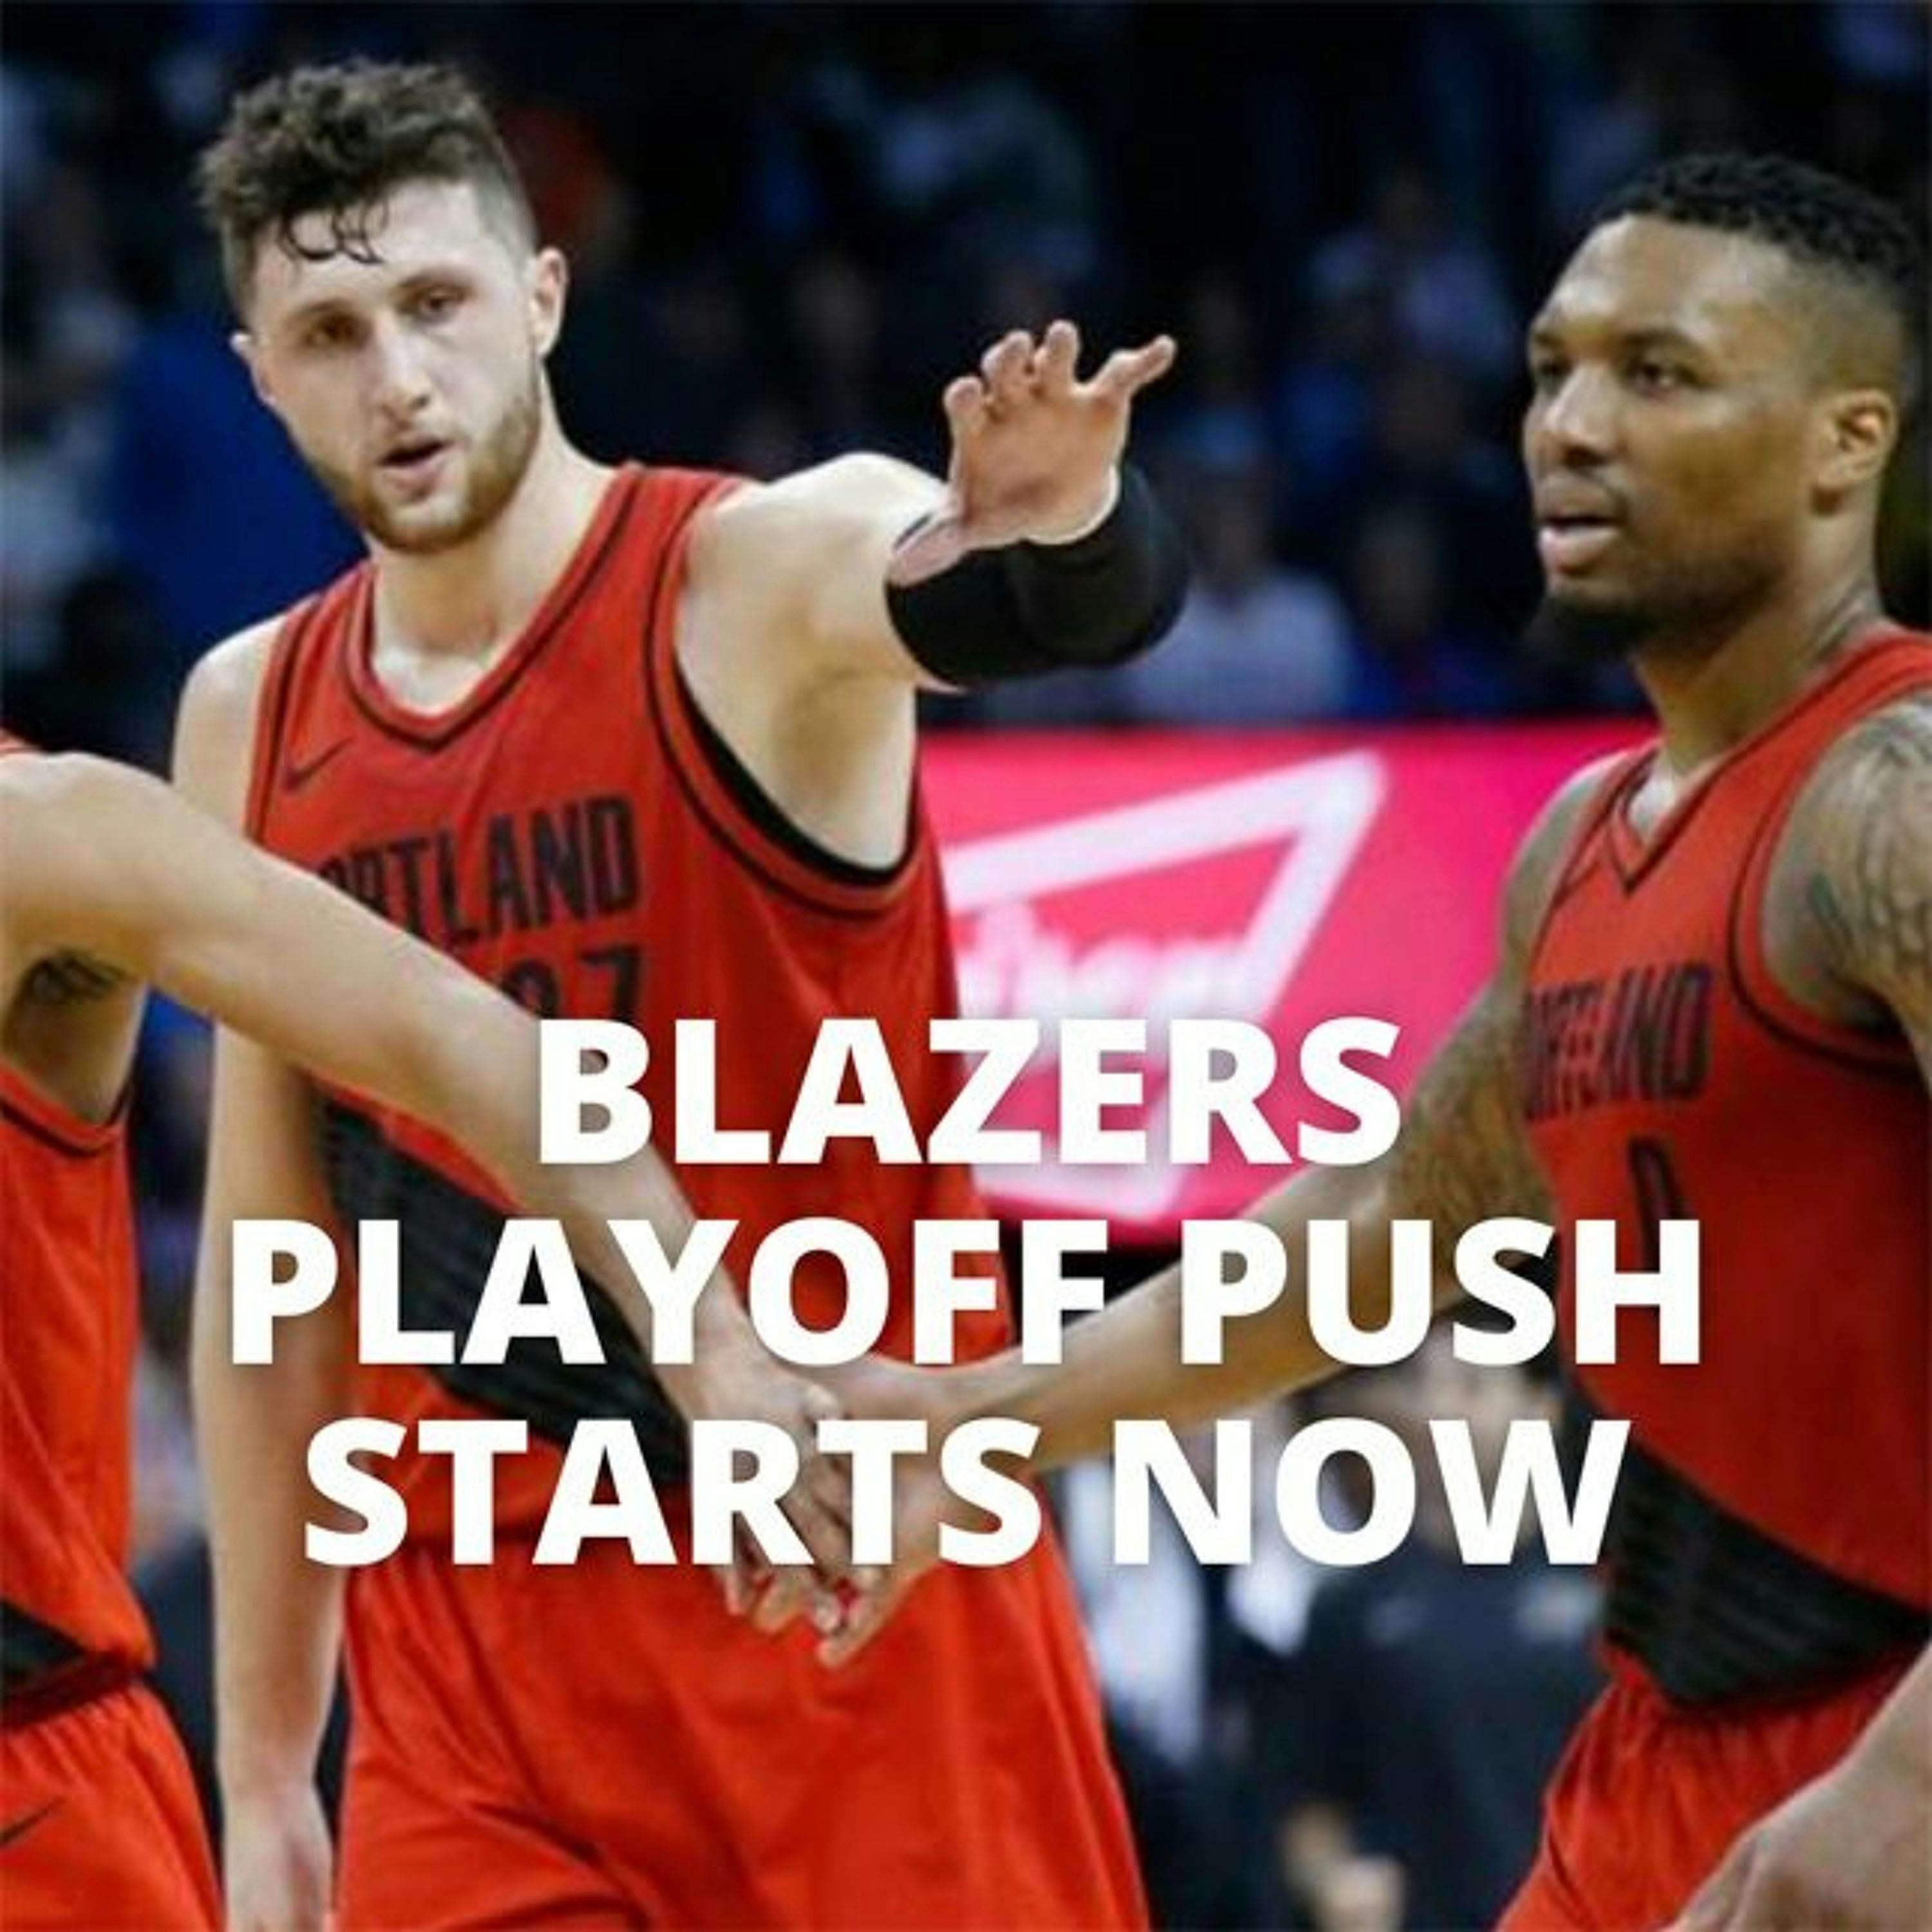 With Nurkic back, Blazers' playoff push starts now